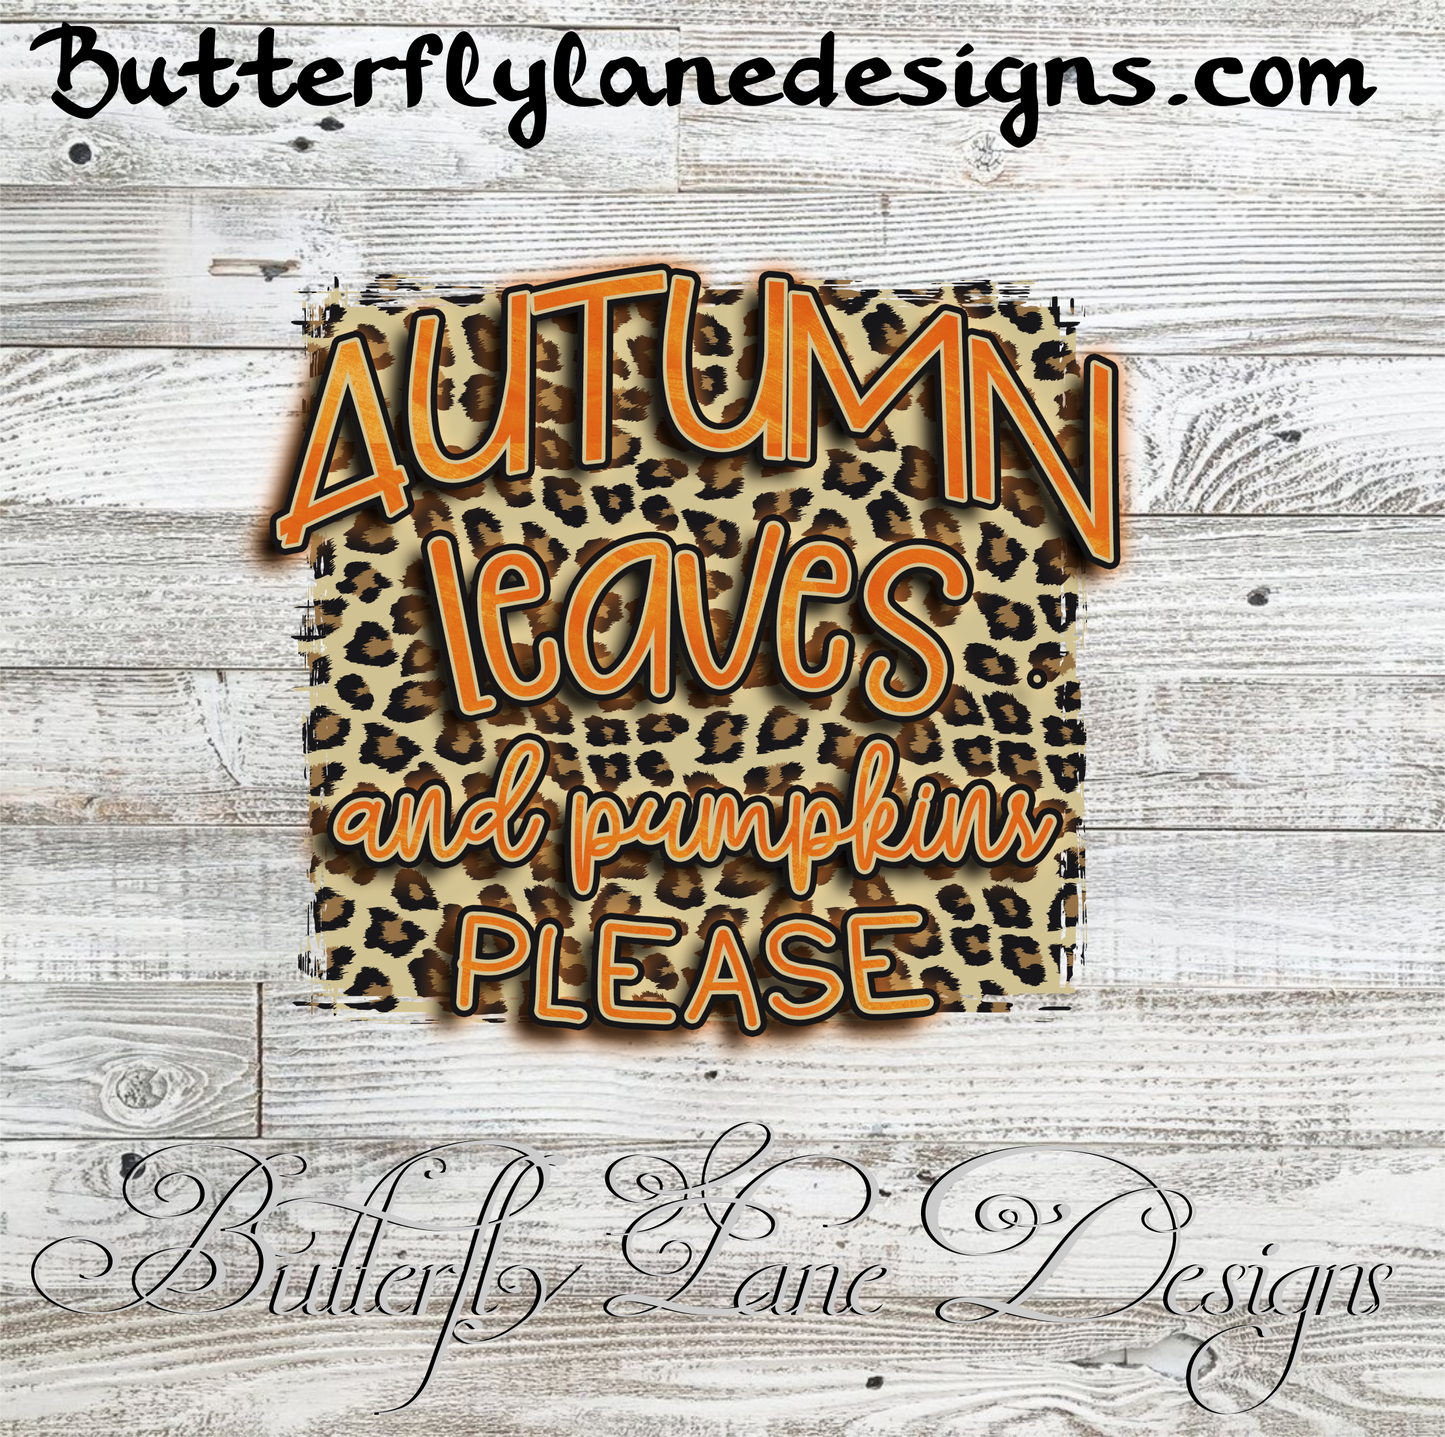 Autumn Leaves and Pumpkins please  :: Clear Cast Decal